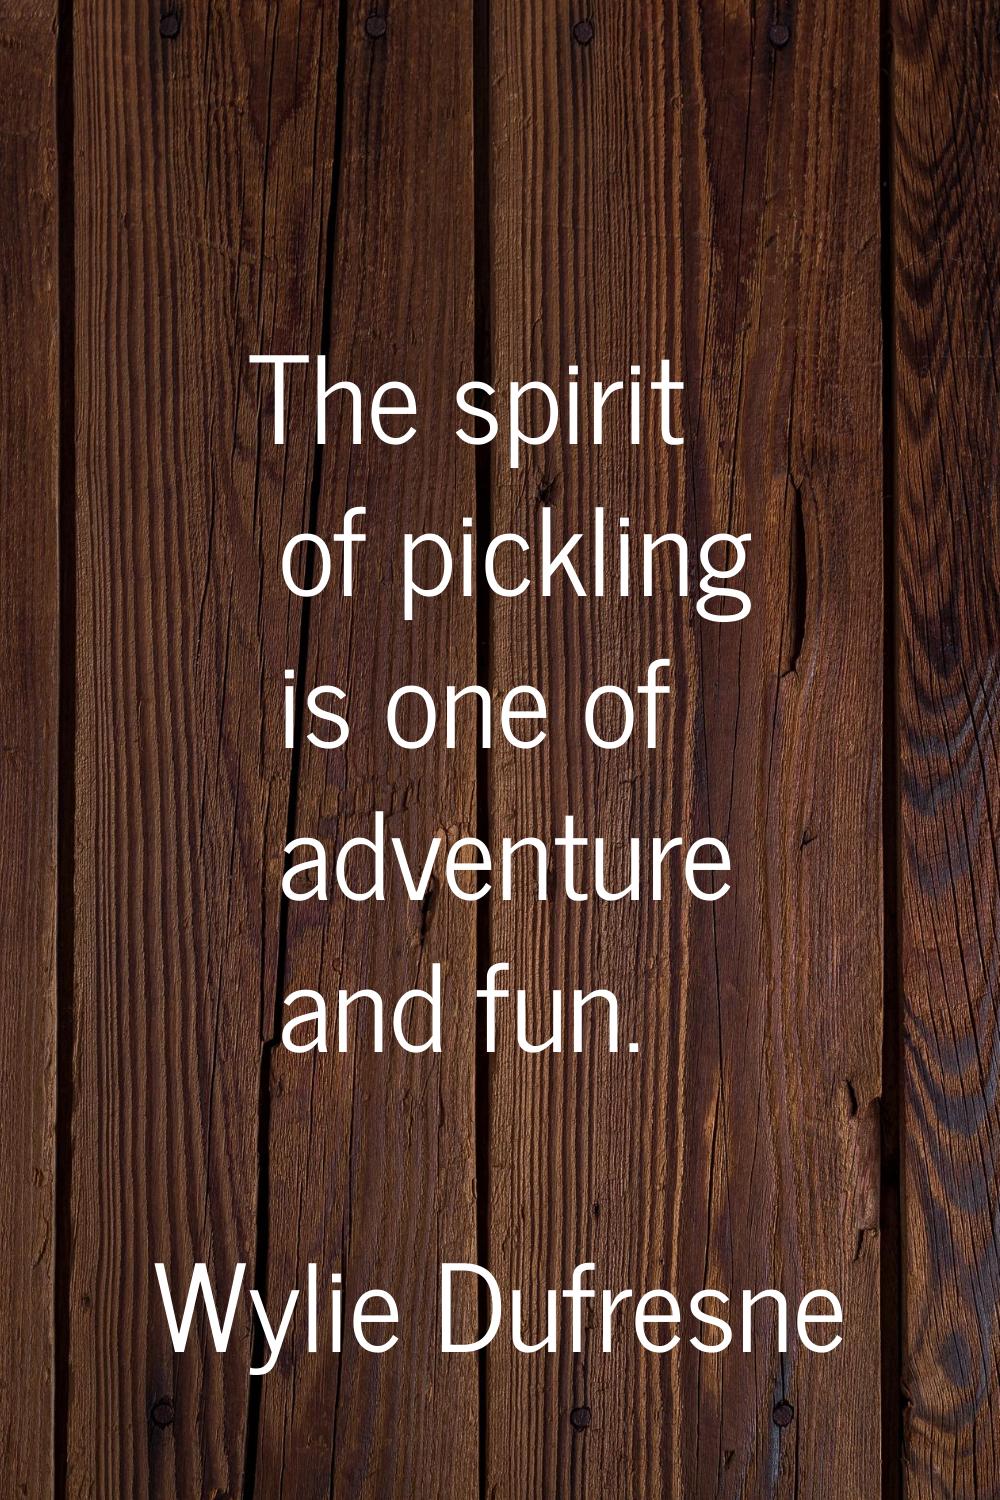 The spirit of pickling is one of adventure and fun.